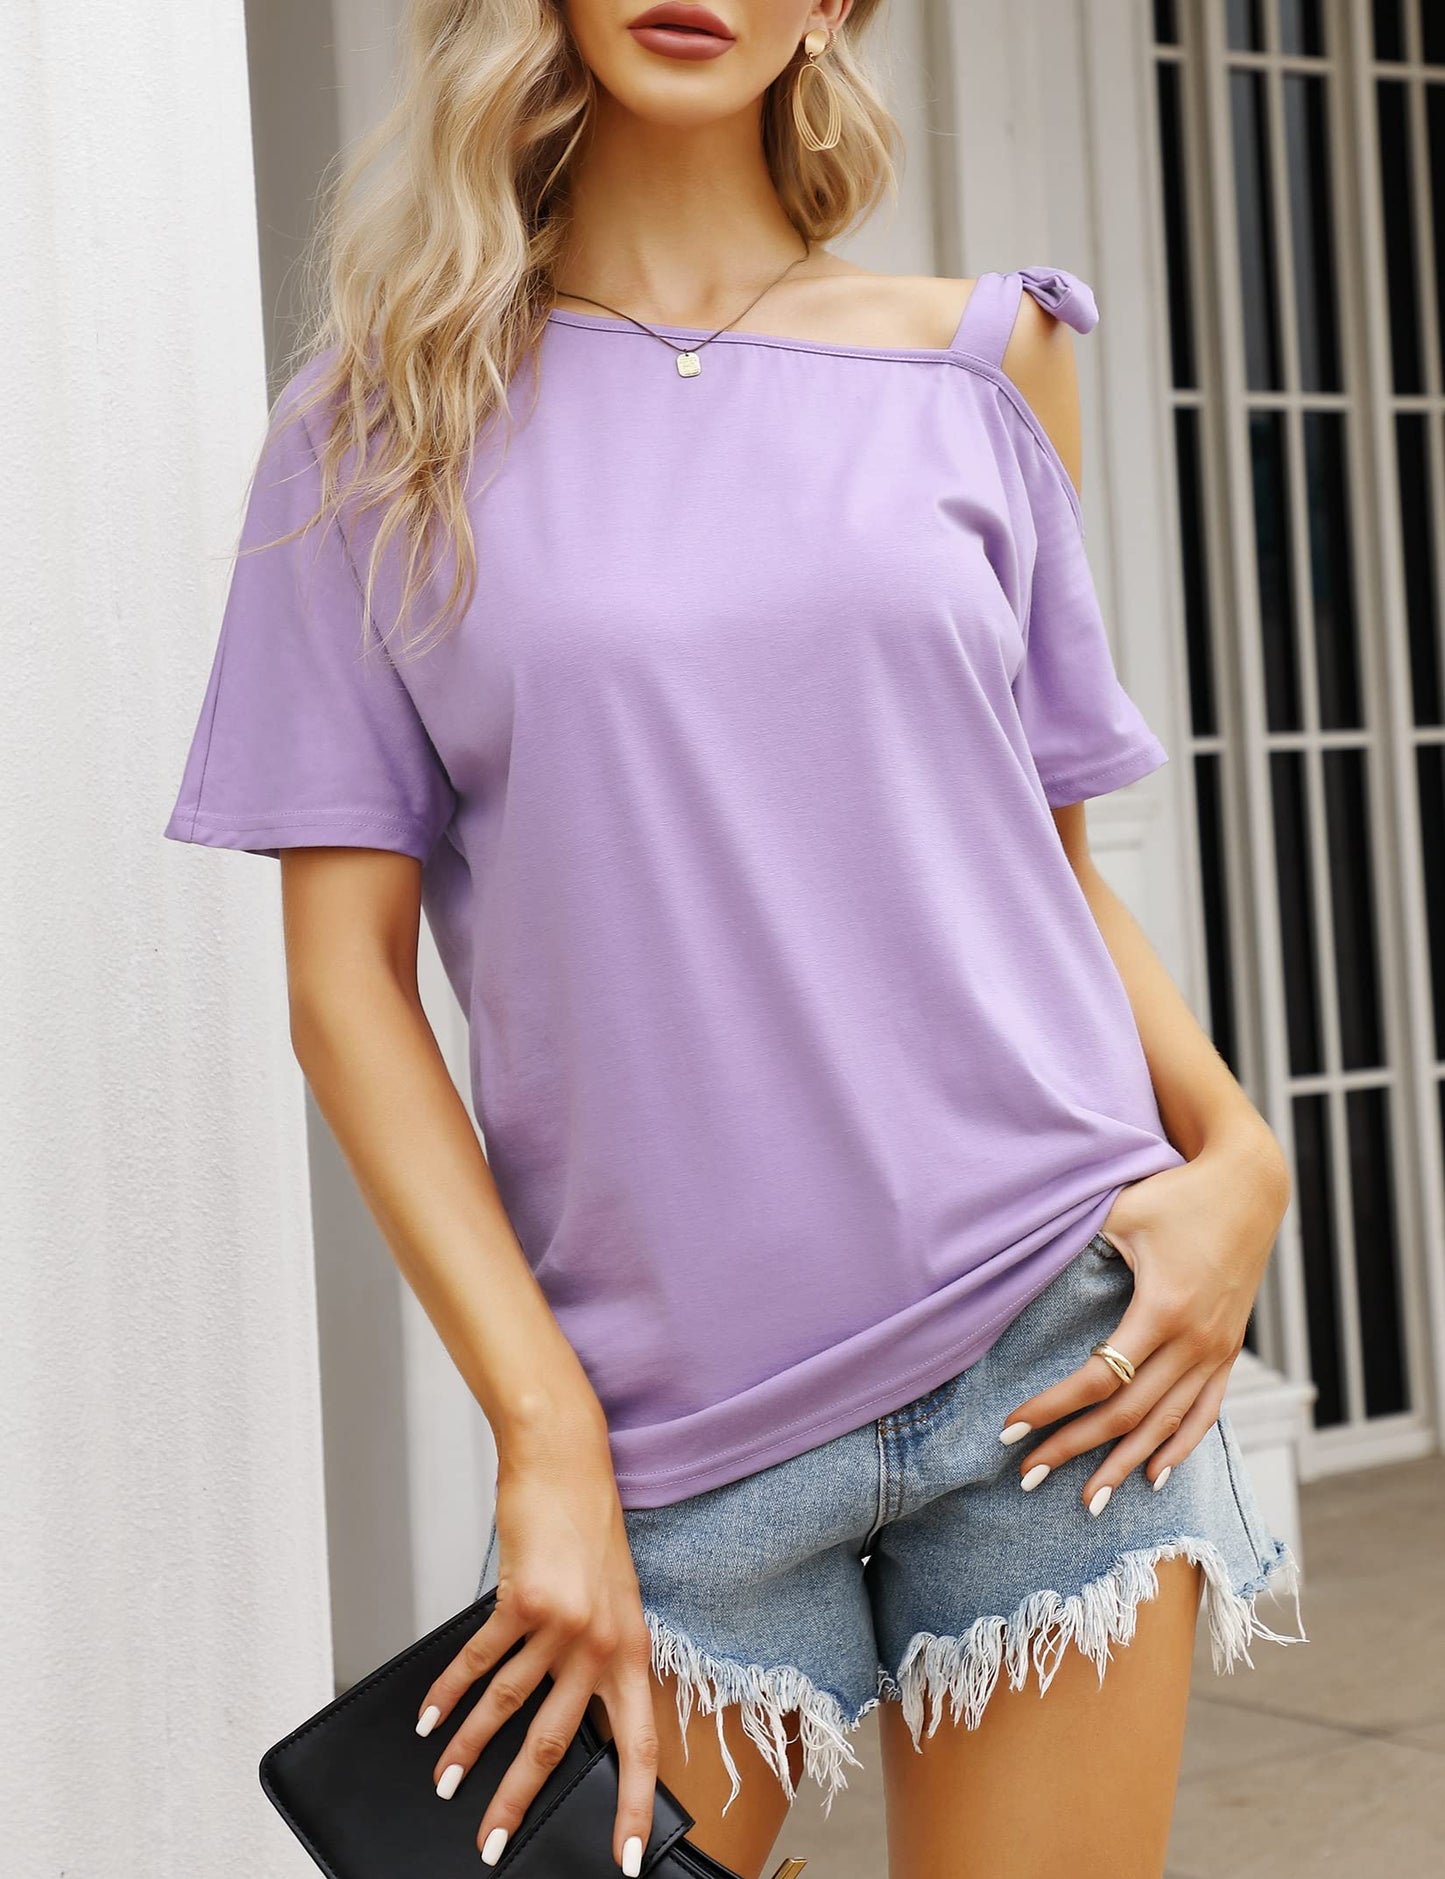 YESFASHION Women's Strapless Bow Tie Solid Color Casual T-Shirt Purple